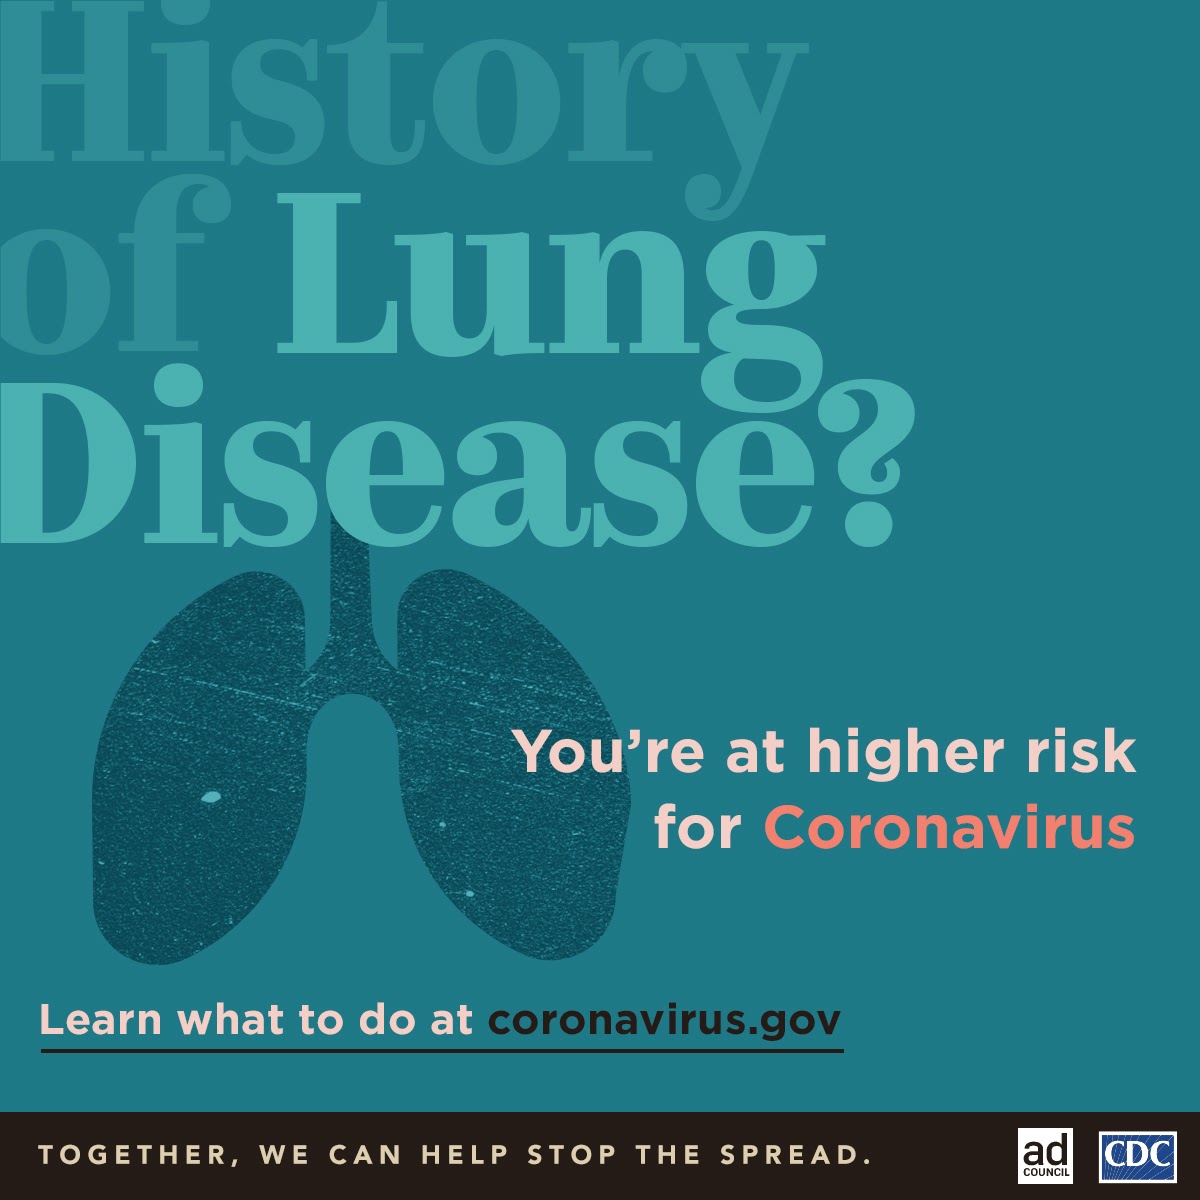 History of Lung Disease, COVID-19